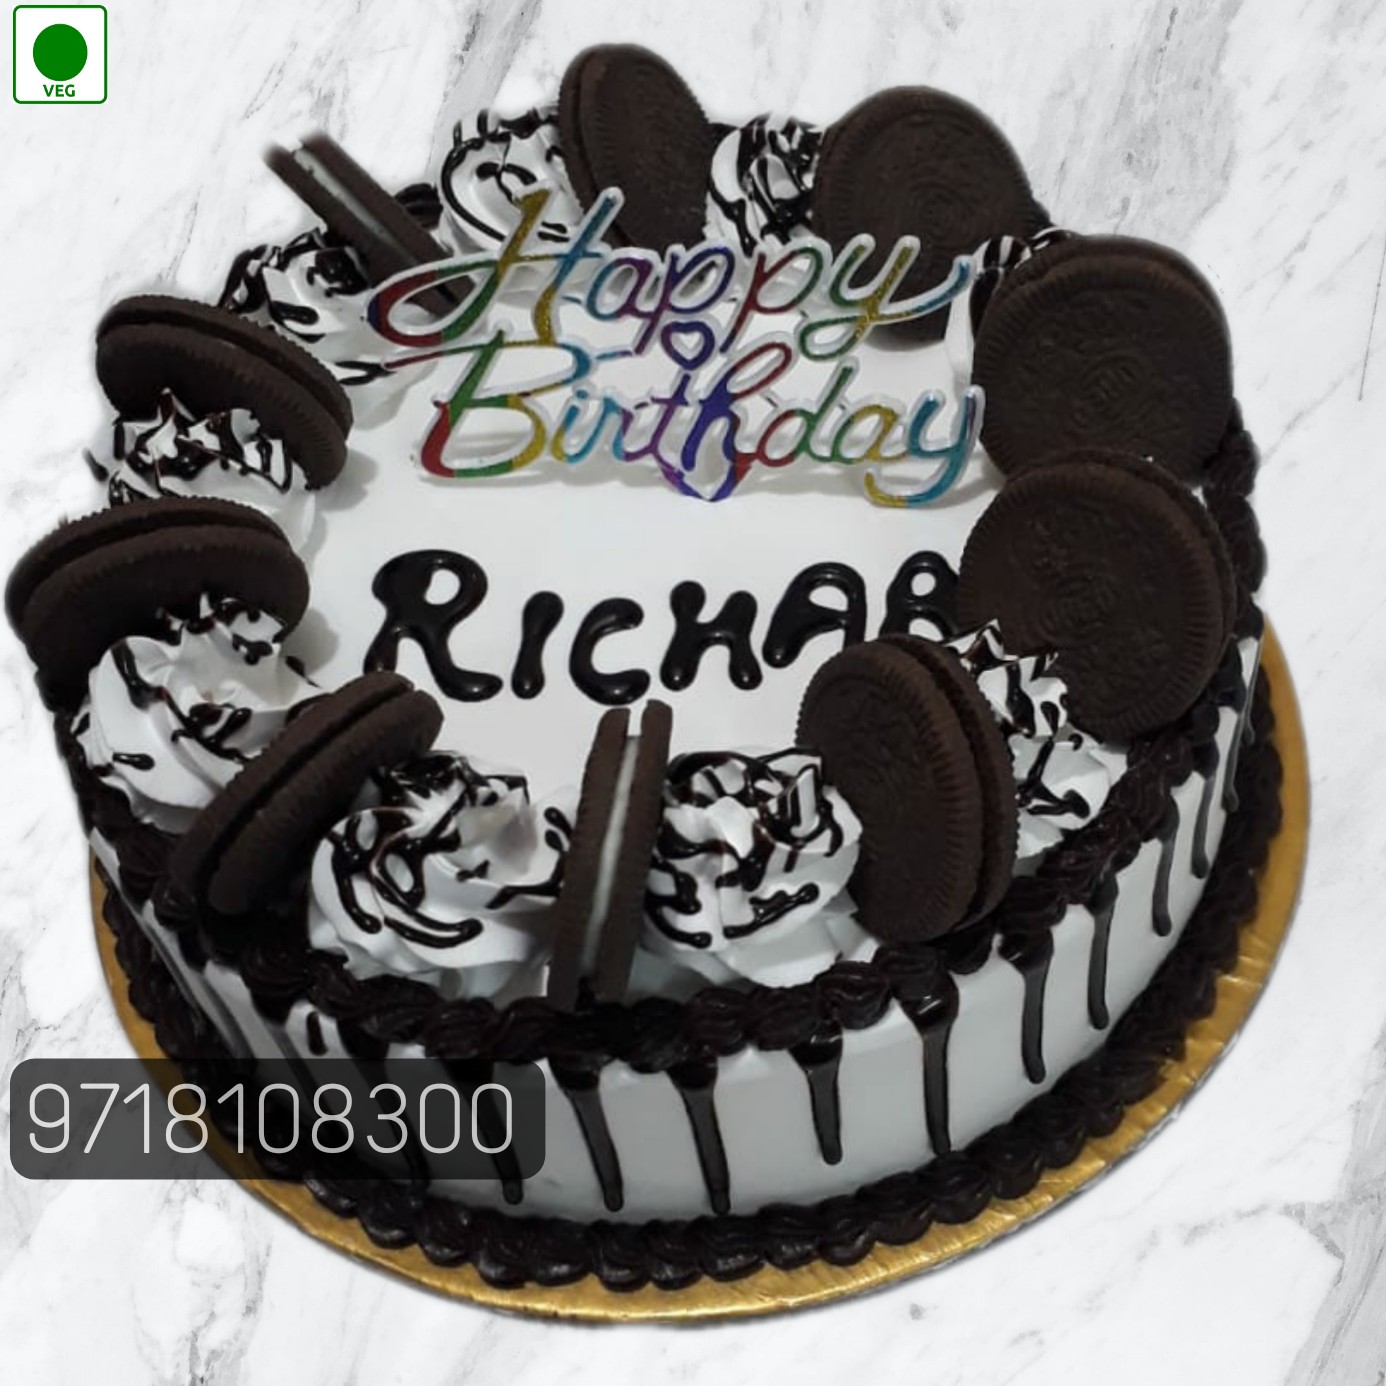 Top Cake Delivery Services in Santragachi  Best Online Cake Delivery  Services  Justdial